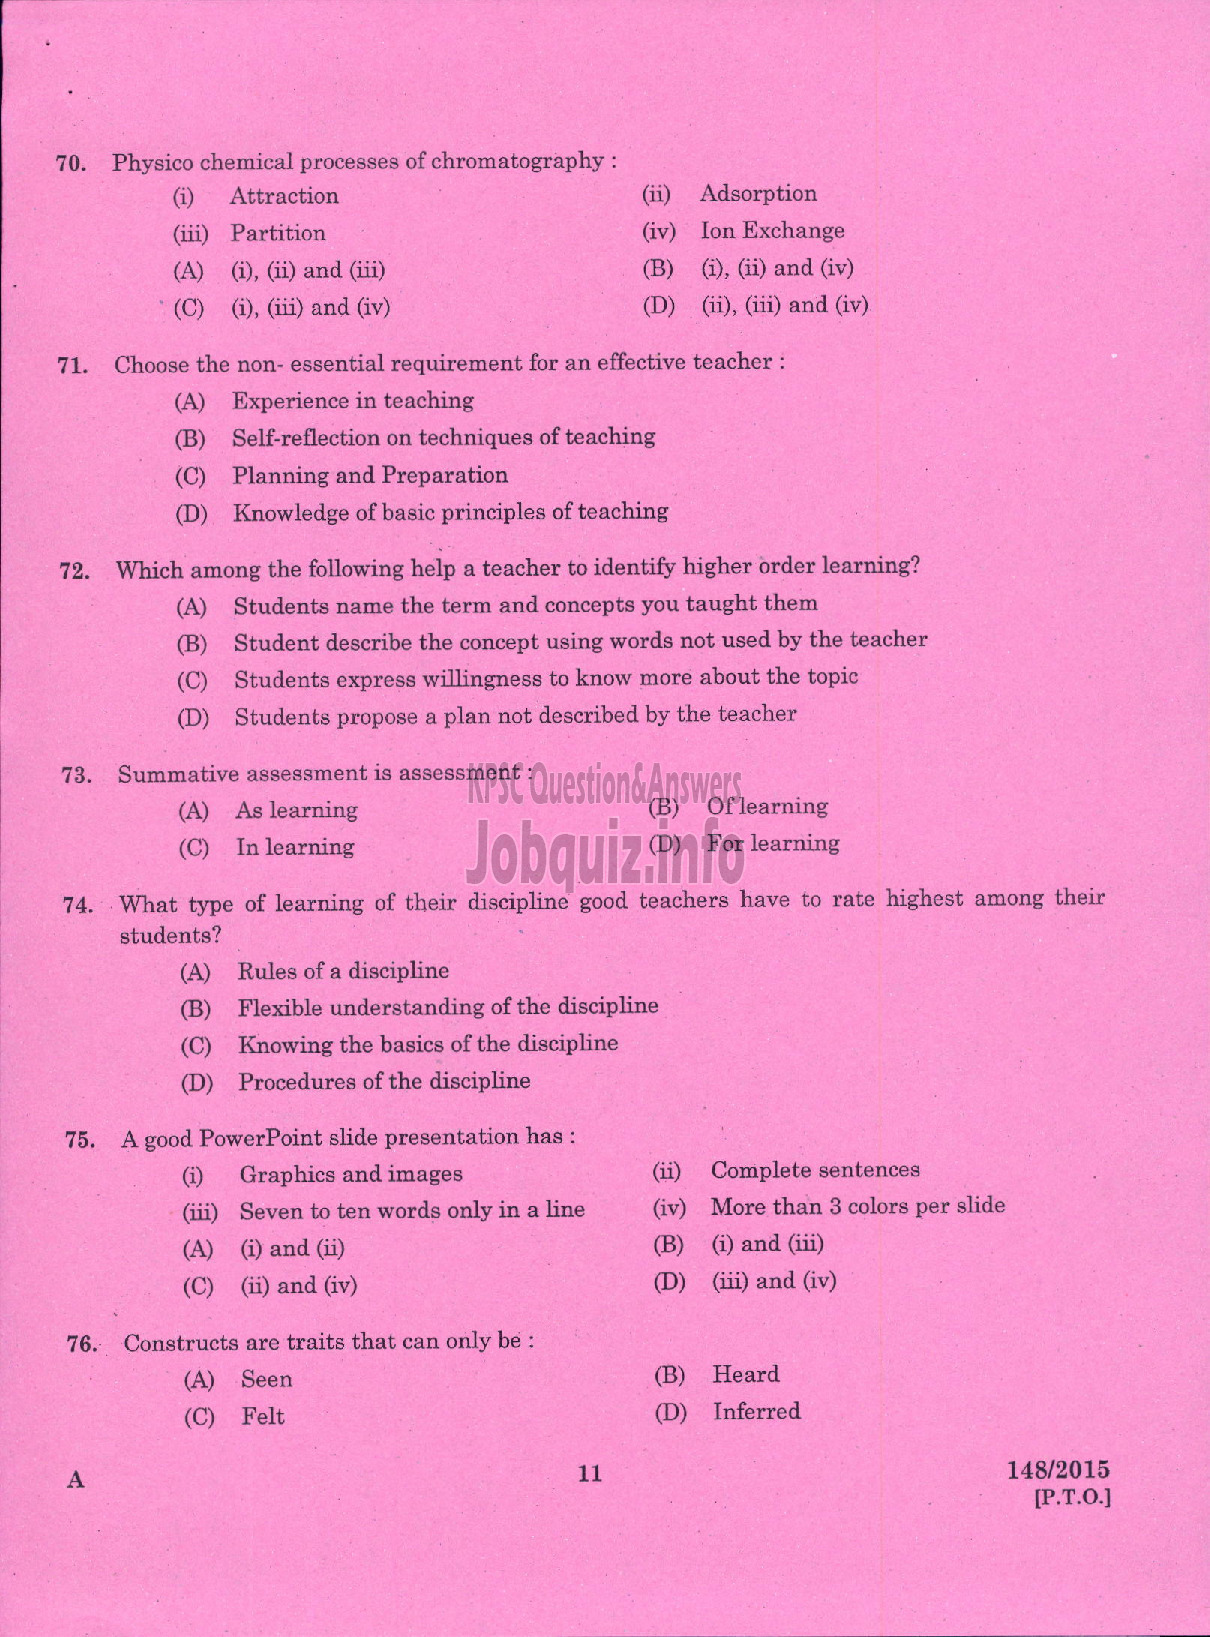 Kerala PSC Question Paper - LECTURER IN HOMESCIENCE FOOD AND NUTRITION COLLEGIATE EDUCATION-9